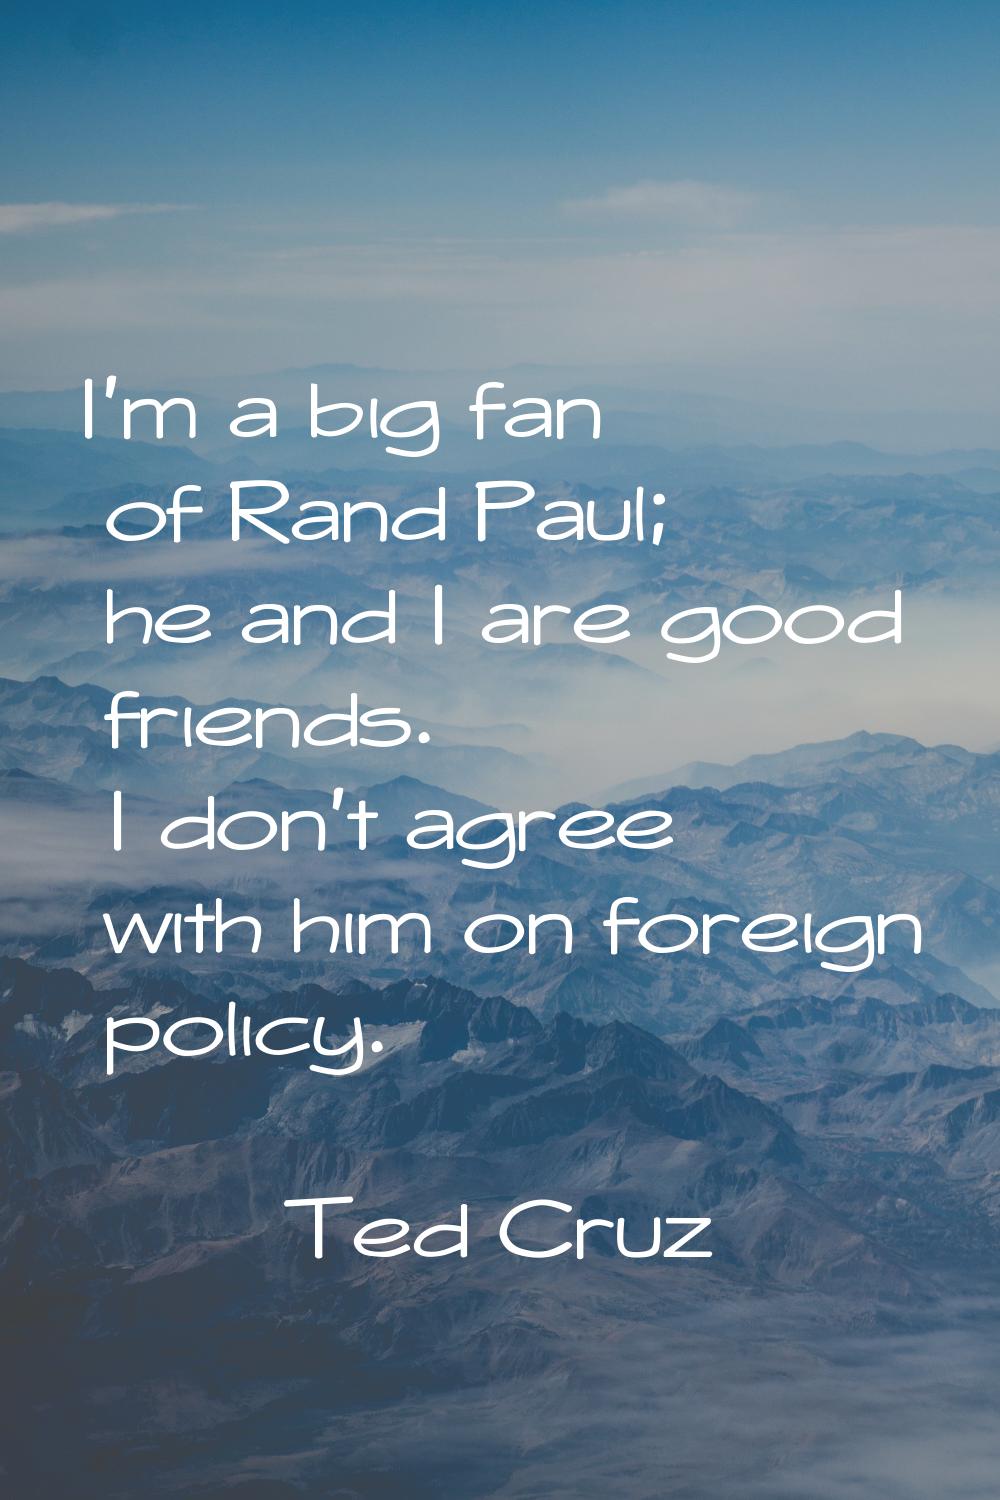 I'm a big fan of Rand Paul; he and I are good friends. I don't agree with him on foreign policy.